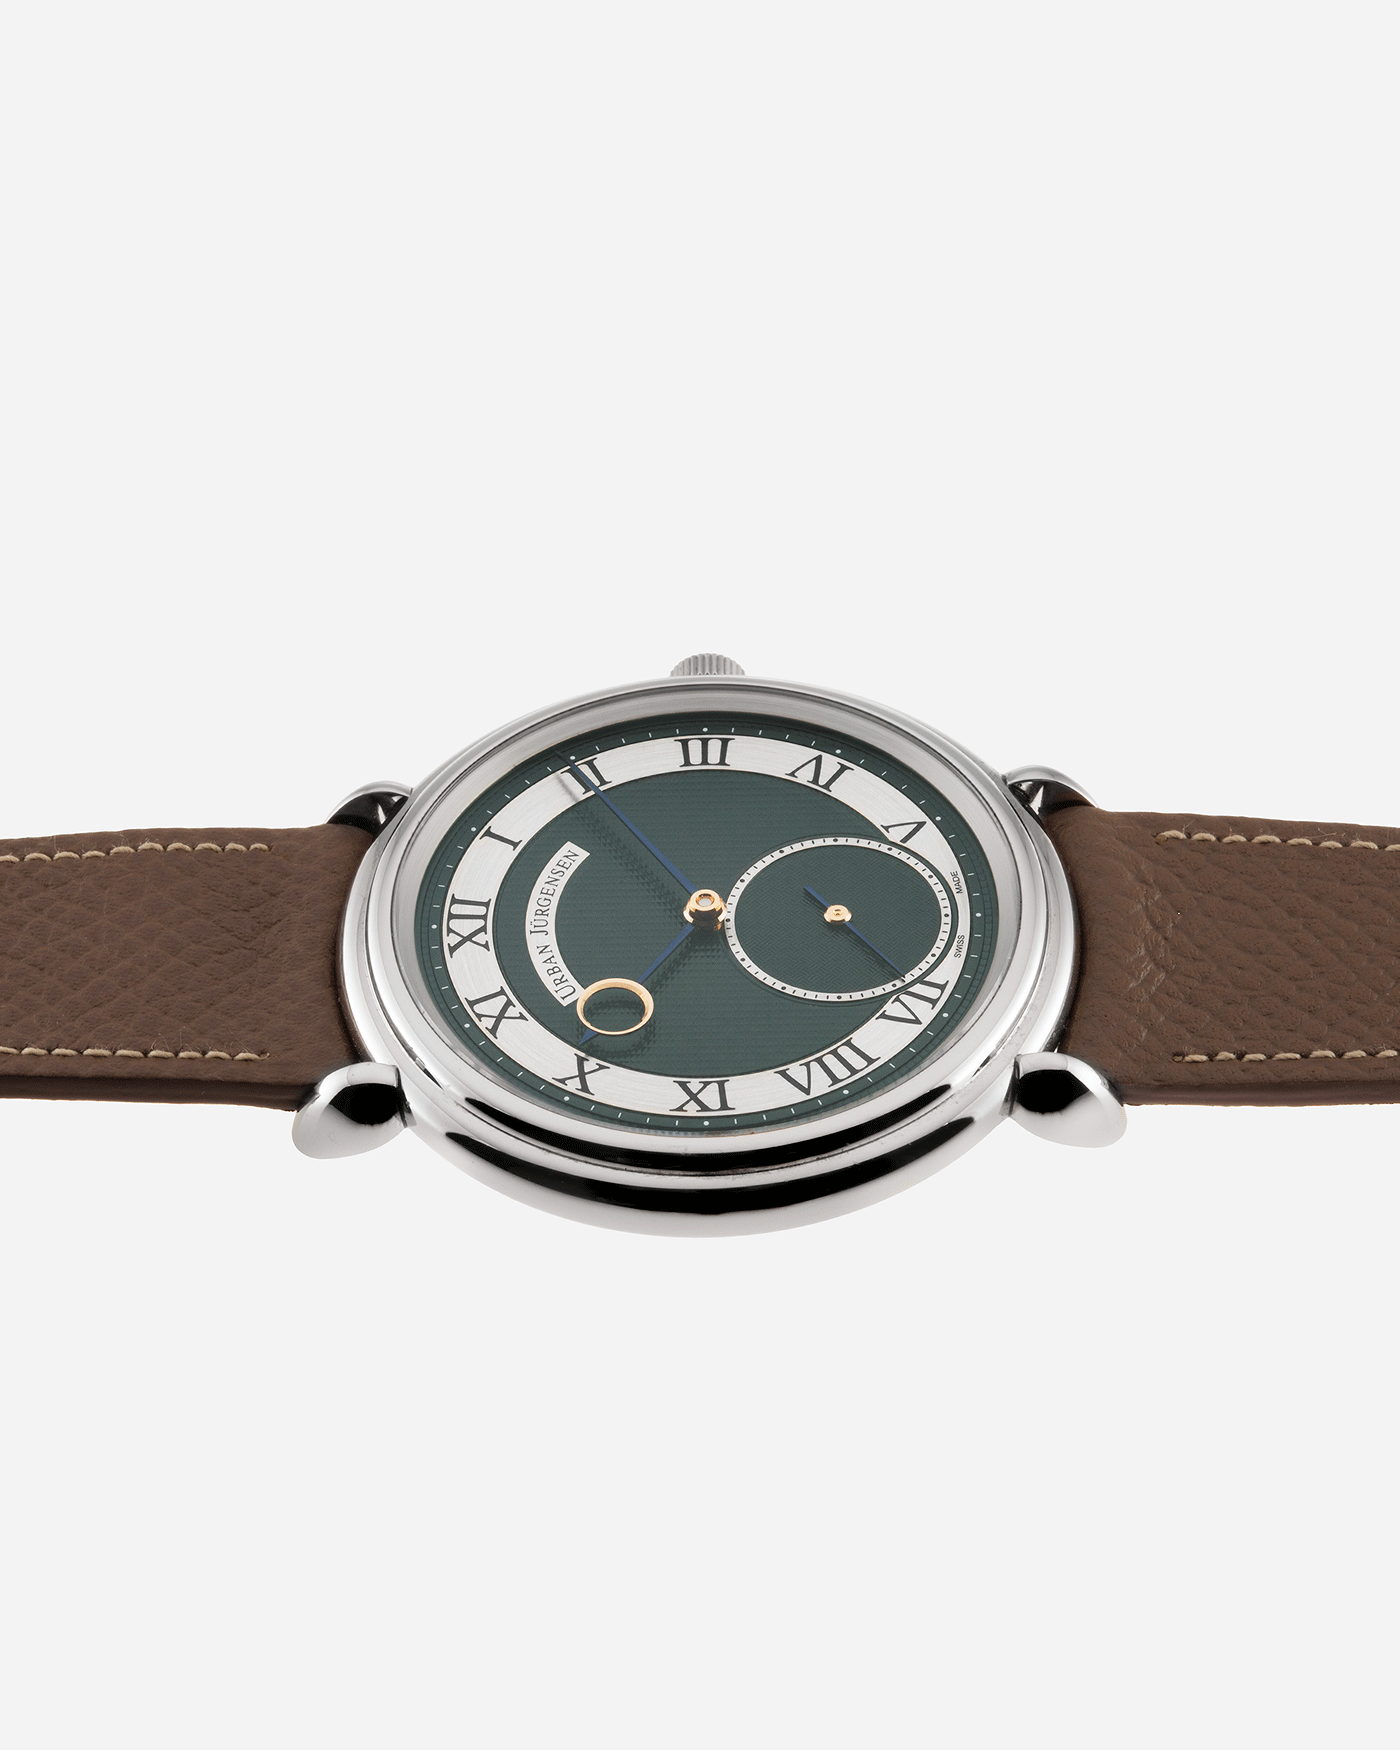 Brand: Urban Jurgensen Year: 2020 Model: Big 8 London Edition Material: Stainless Steel Movement: Frederic Piguet cal. 1160 Case Diameter: 40mm Strap: Nostime Taupe Grained Calf and Grey Suede Strap by A Collected Man and Stainless Steel Urban Jurgensen Tang Buckle